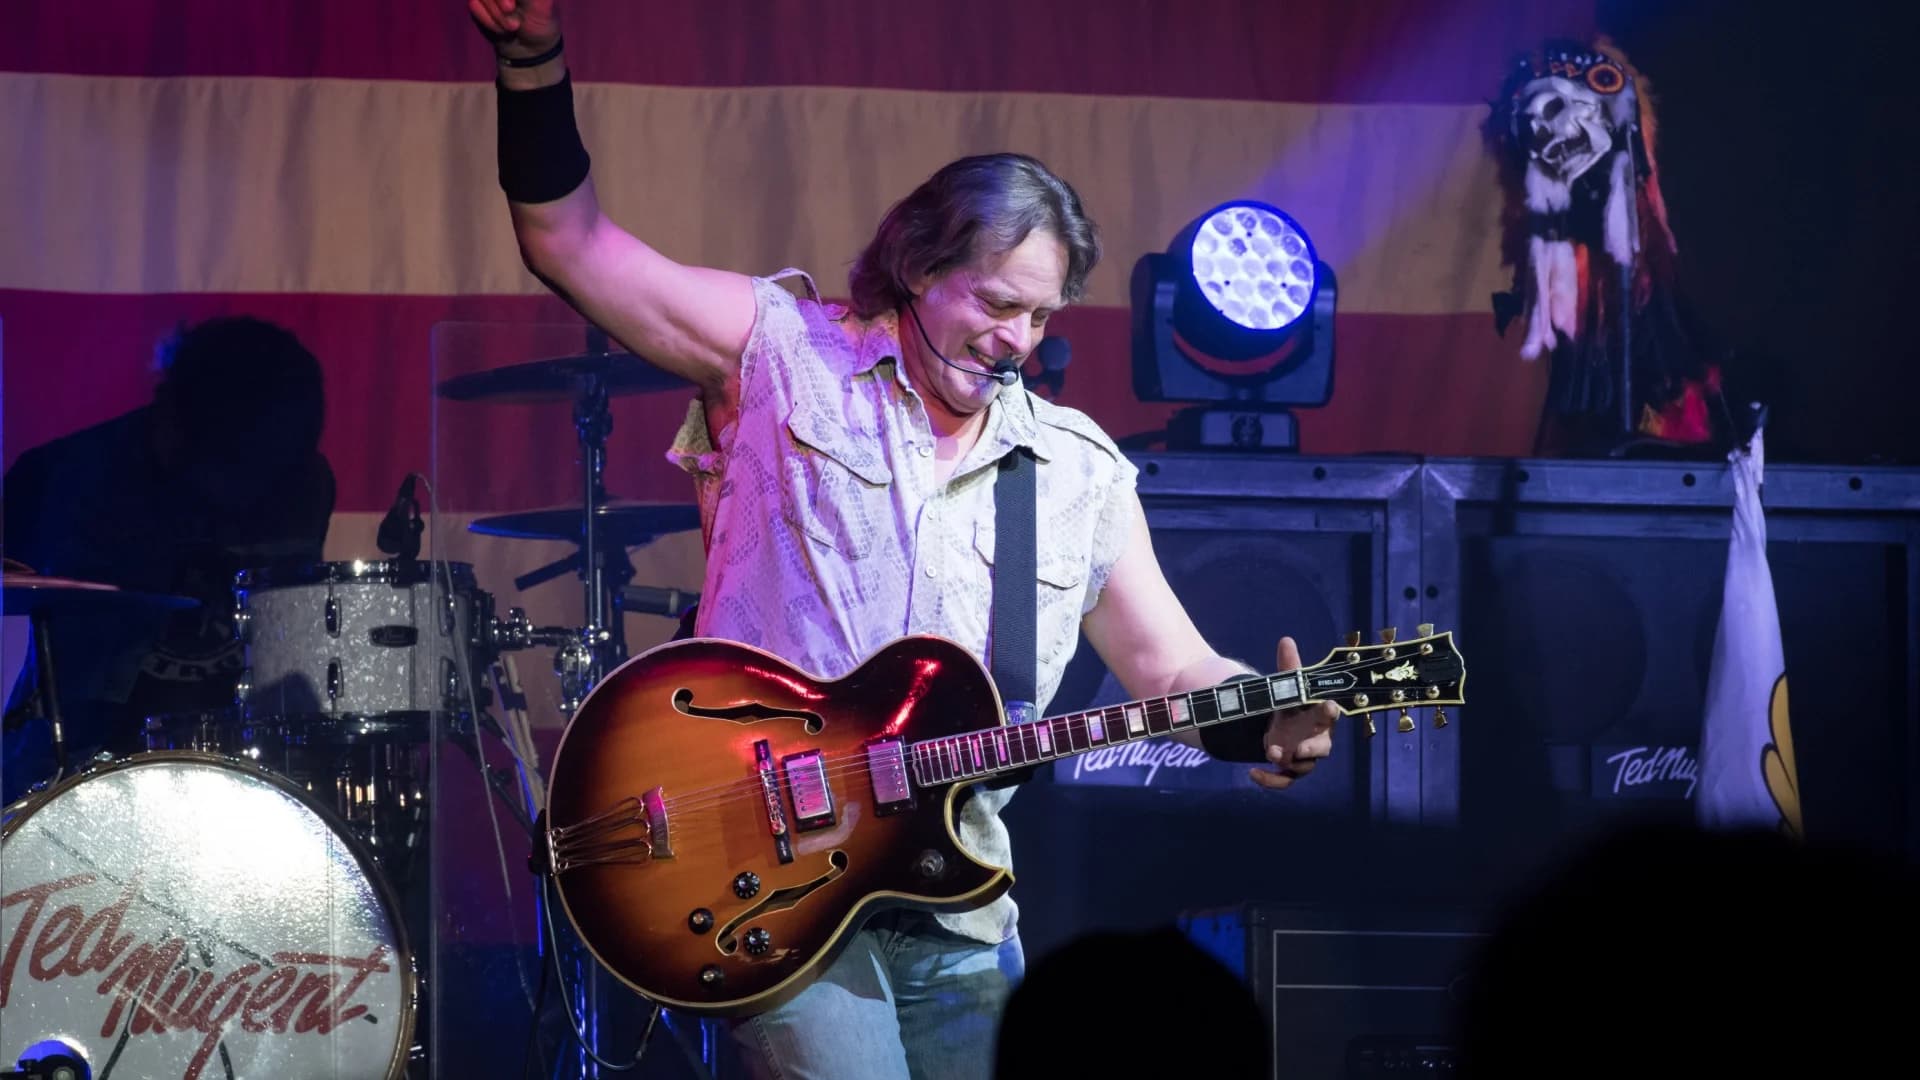 PHOTOS: Ted Nugent performs at the Paramount